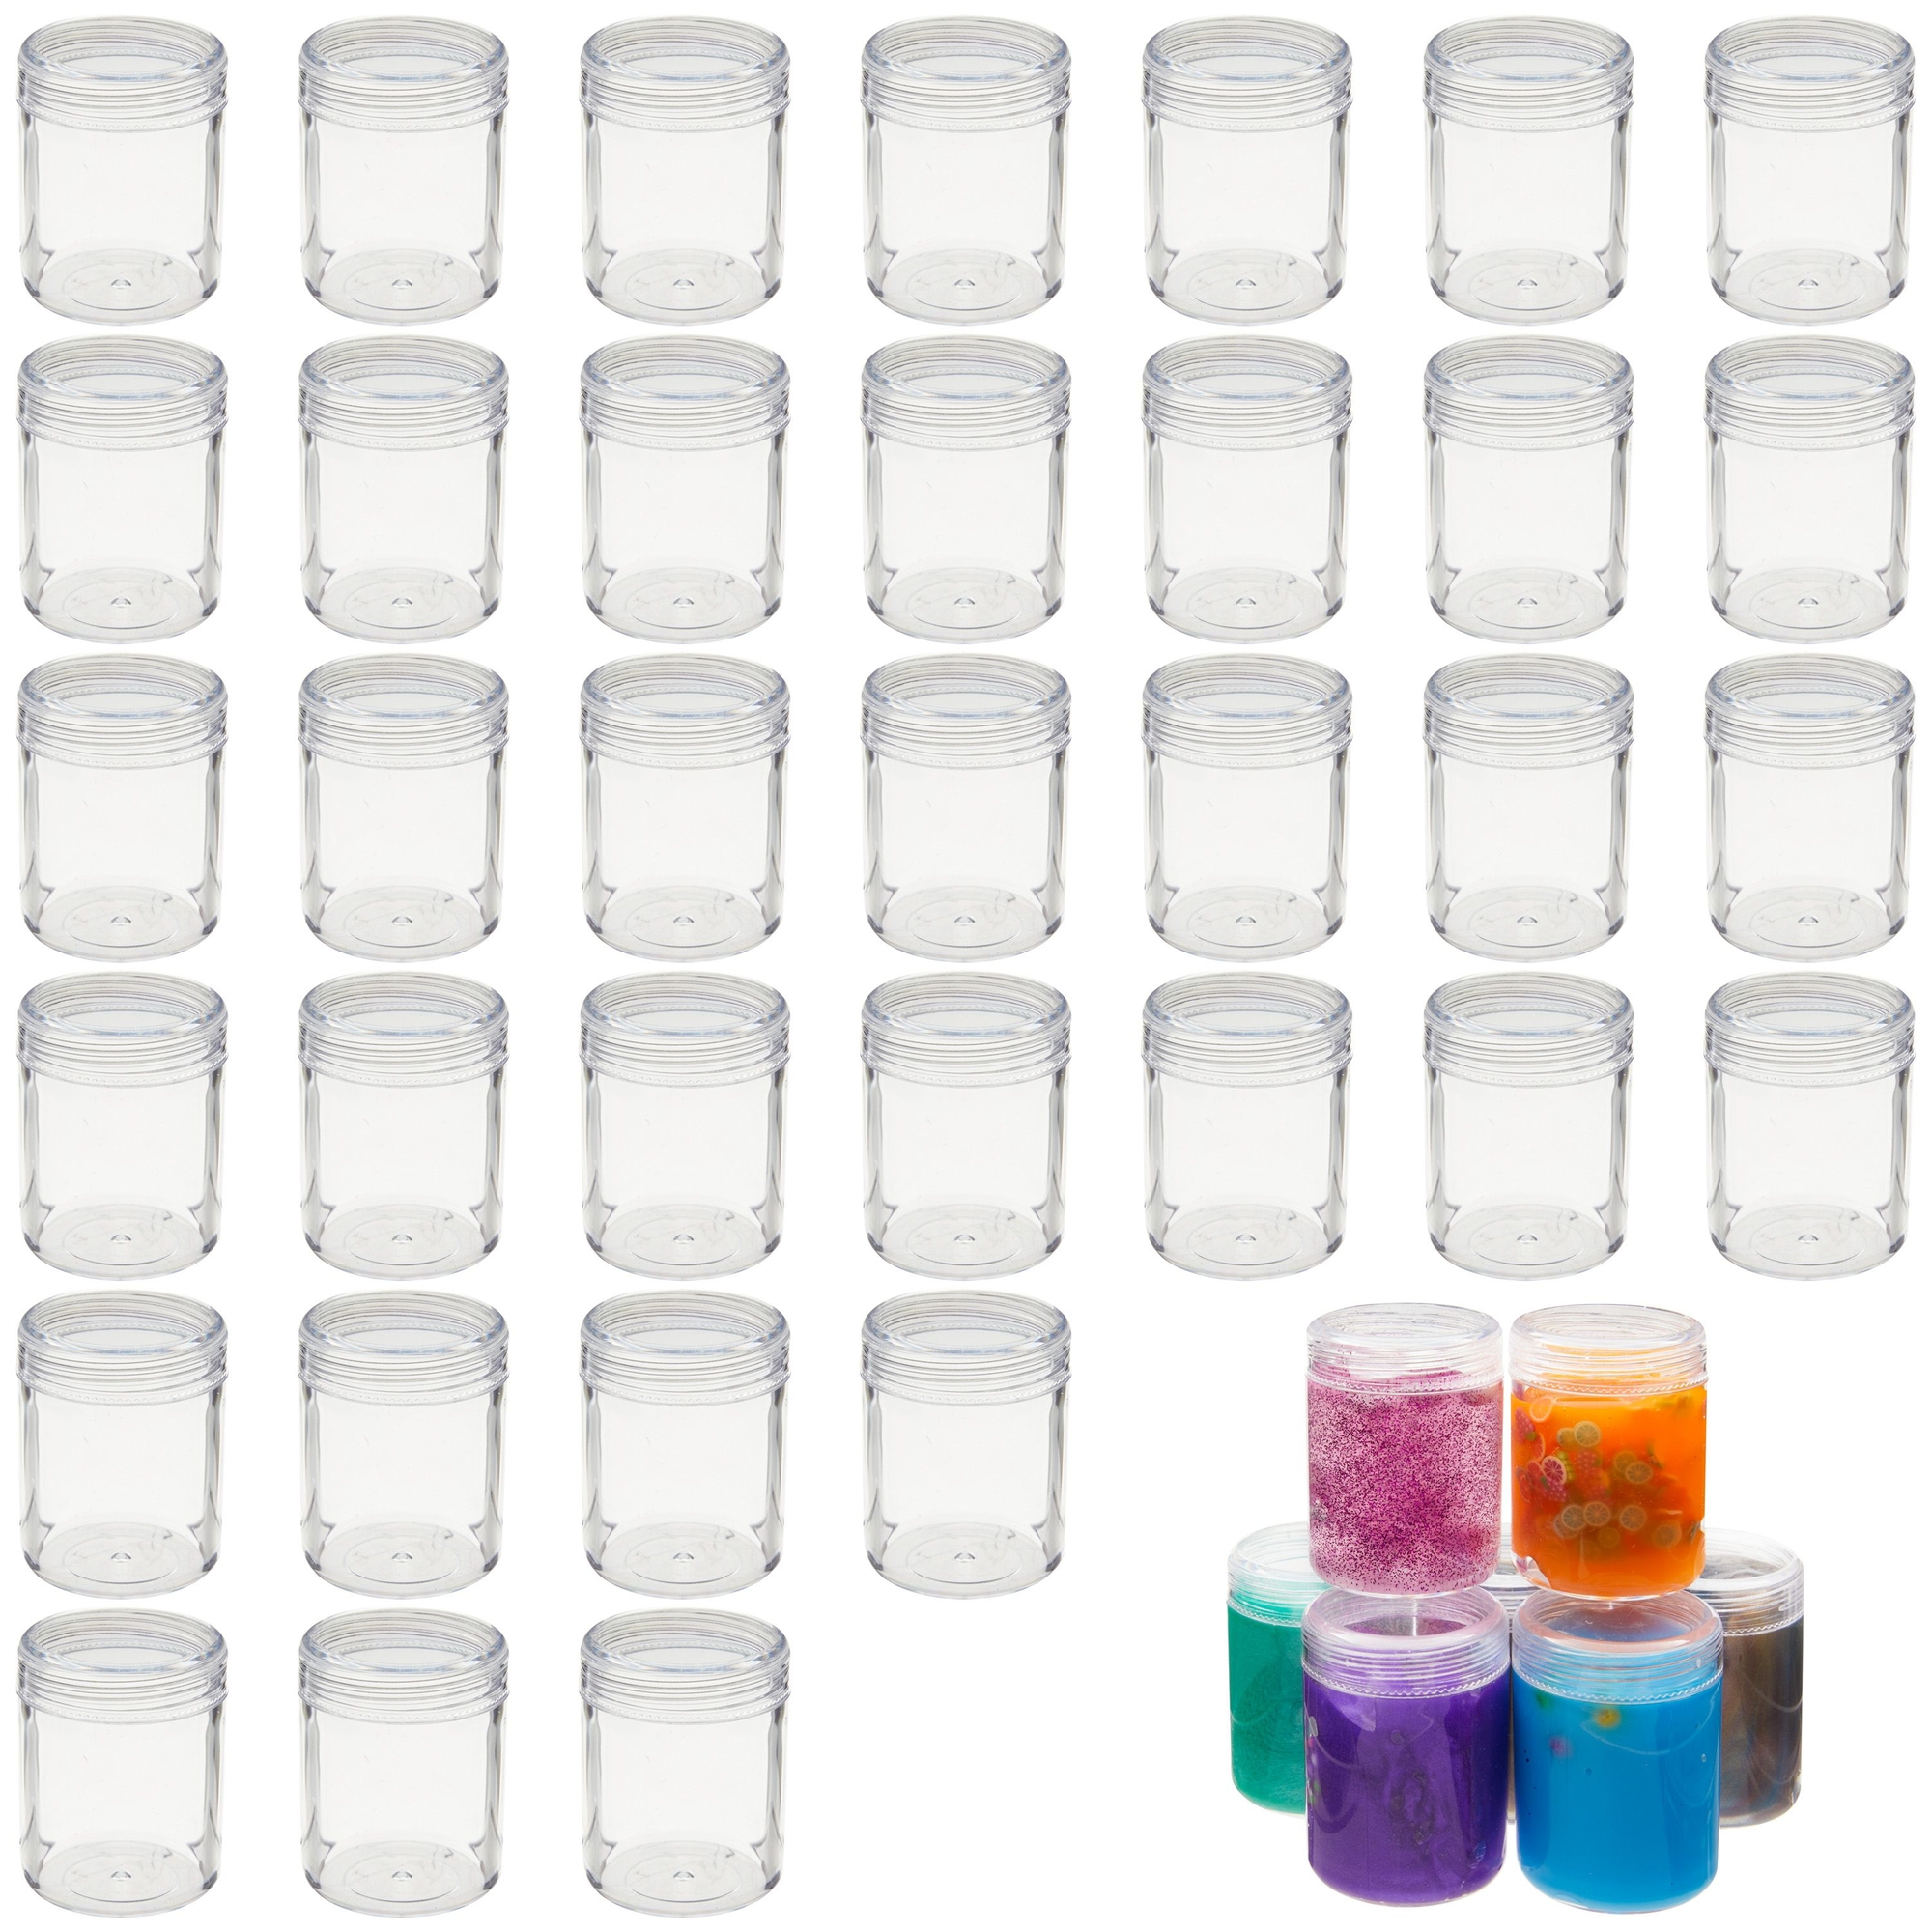 35-Pack 1.2 oz Clear Plastic Jars with Lids for Beads, Beauty Products -  Small Empty Containers for Slime Supplies and Ingredients